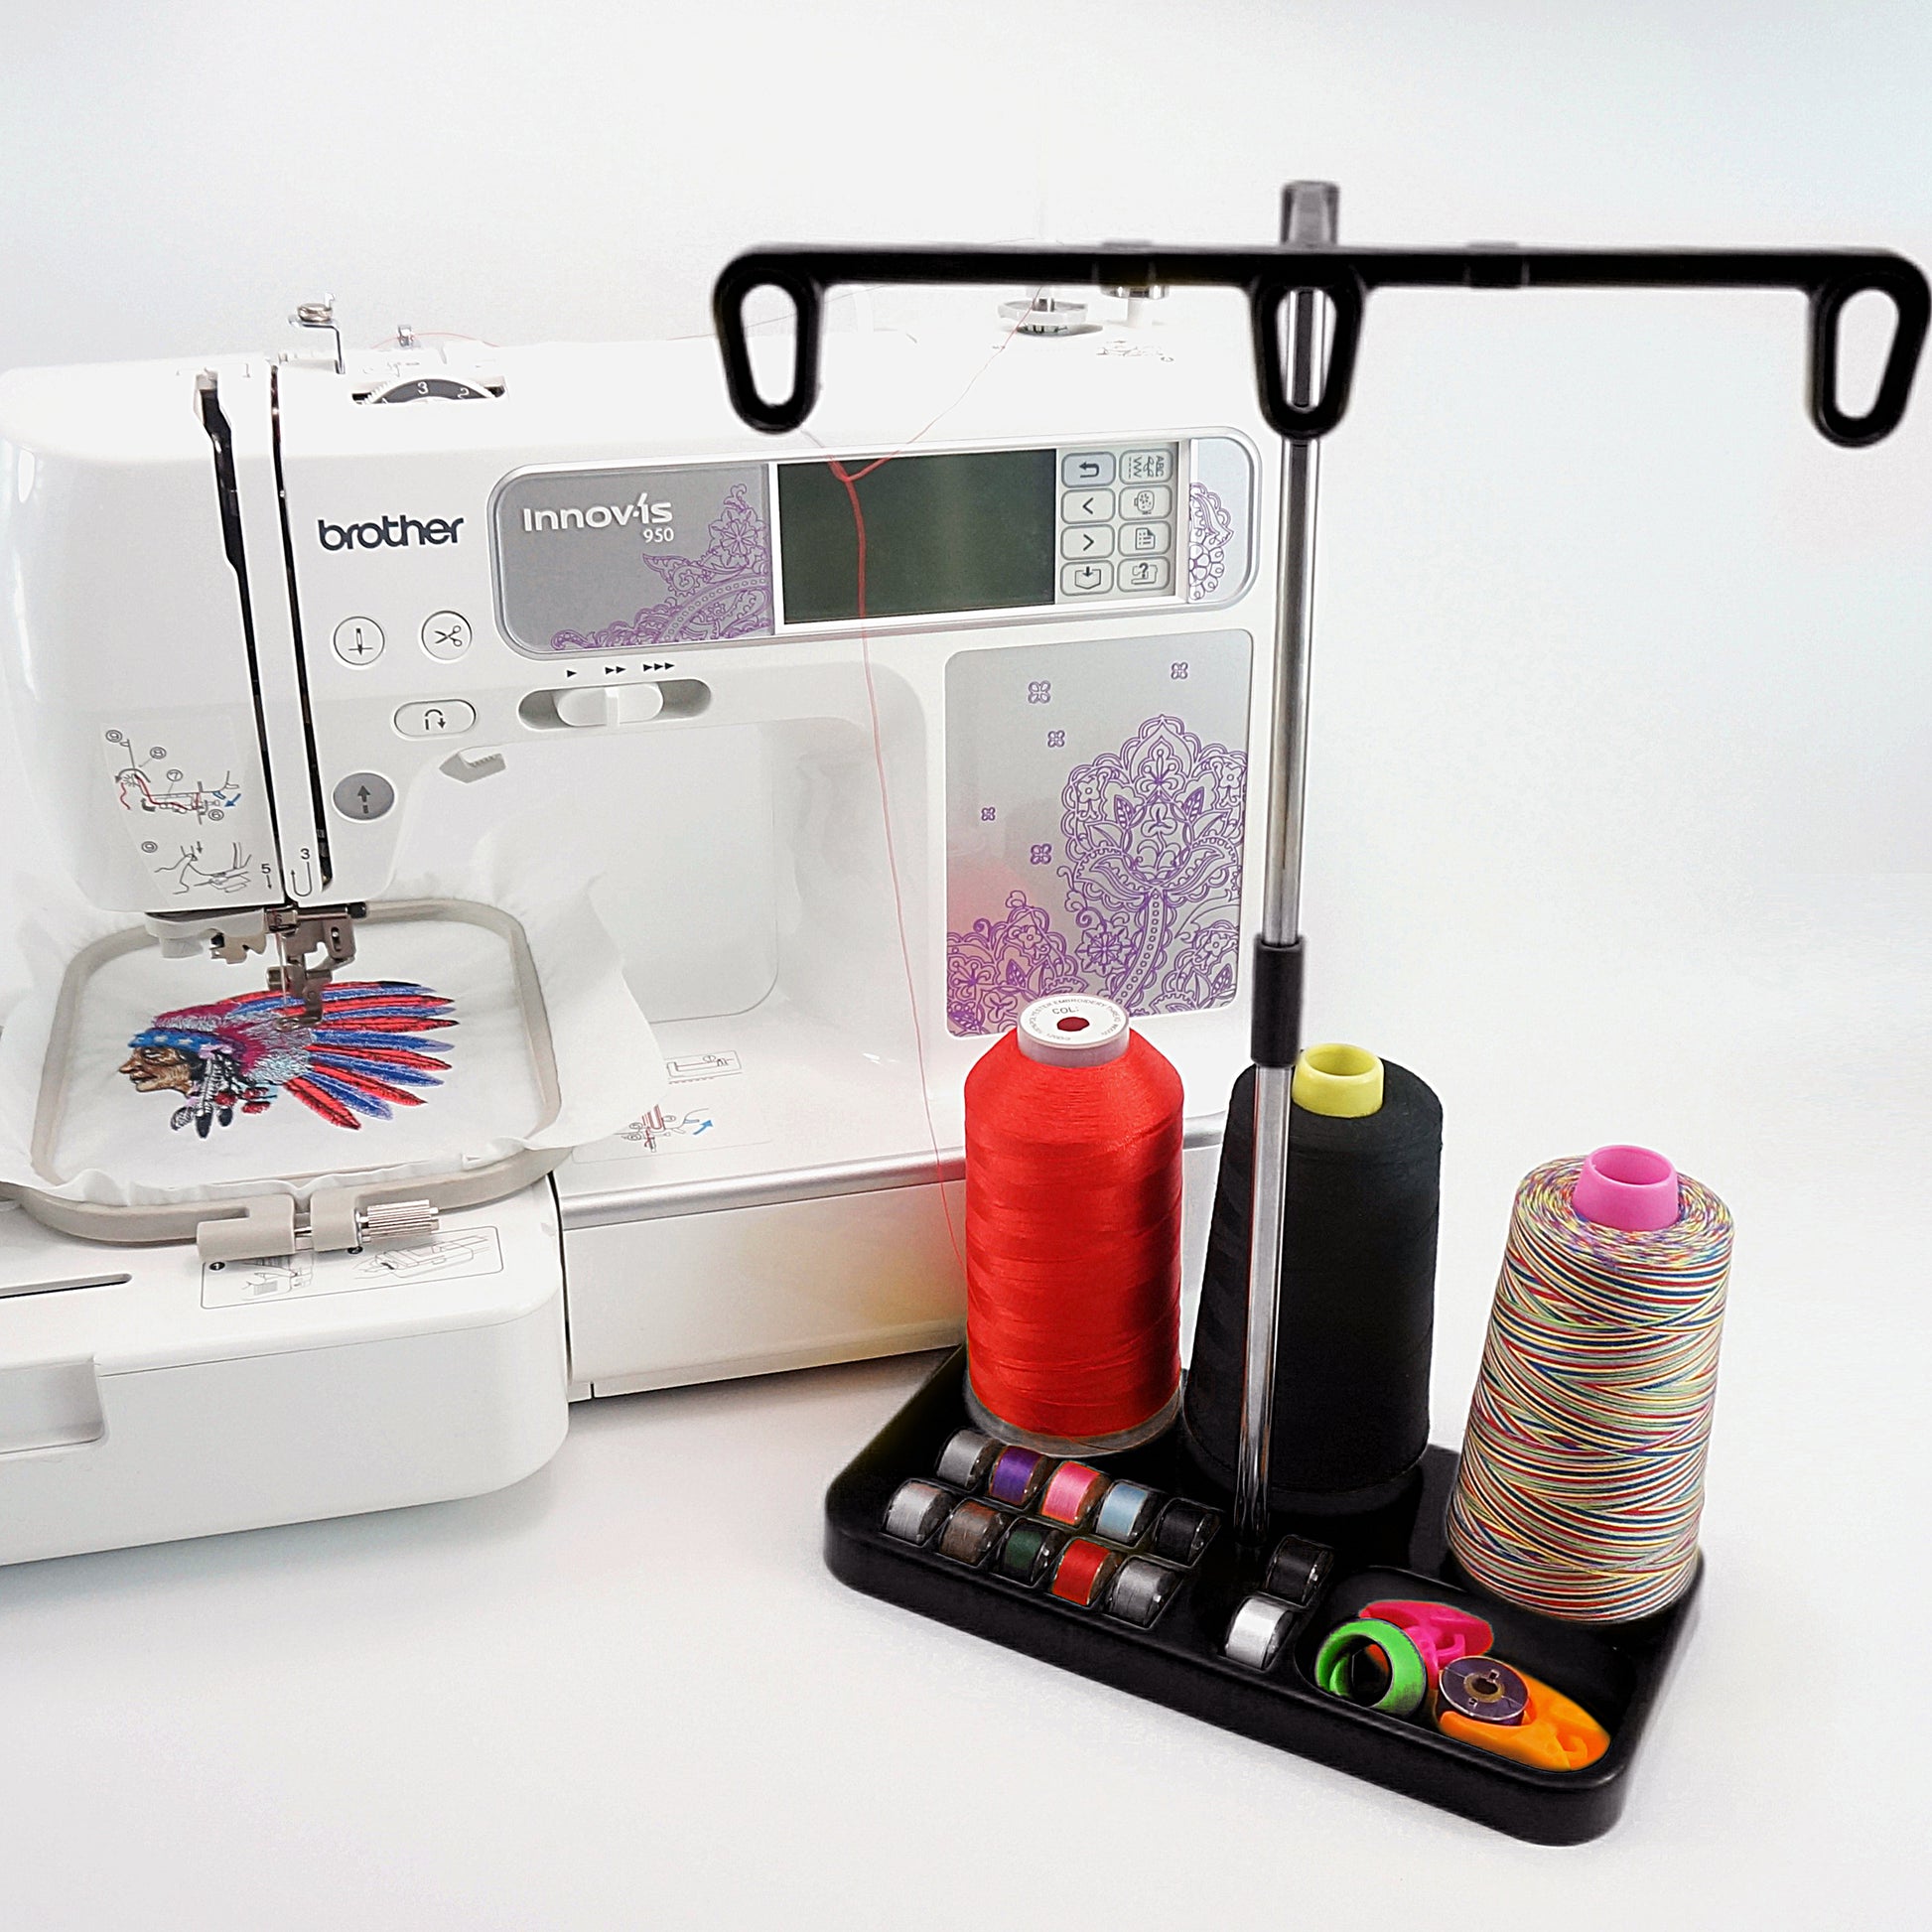 Embroidery Thread 3 Spool Holder for Household Sewing Machine